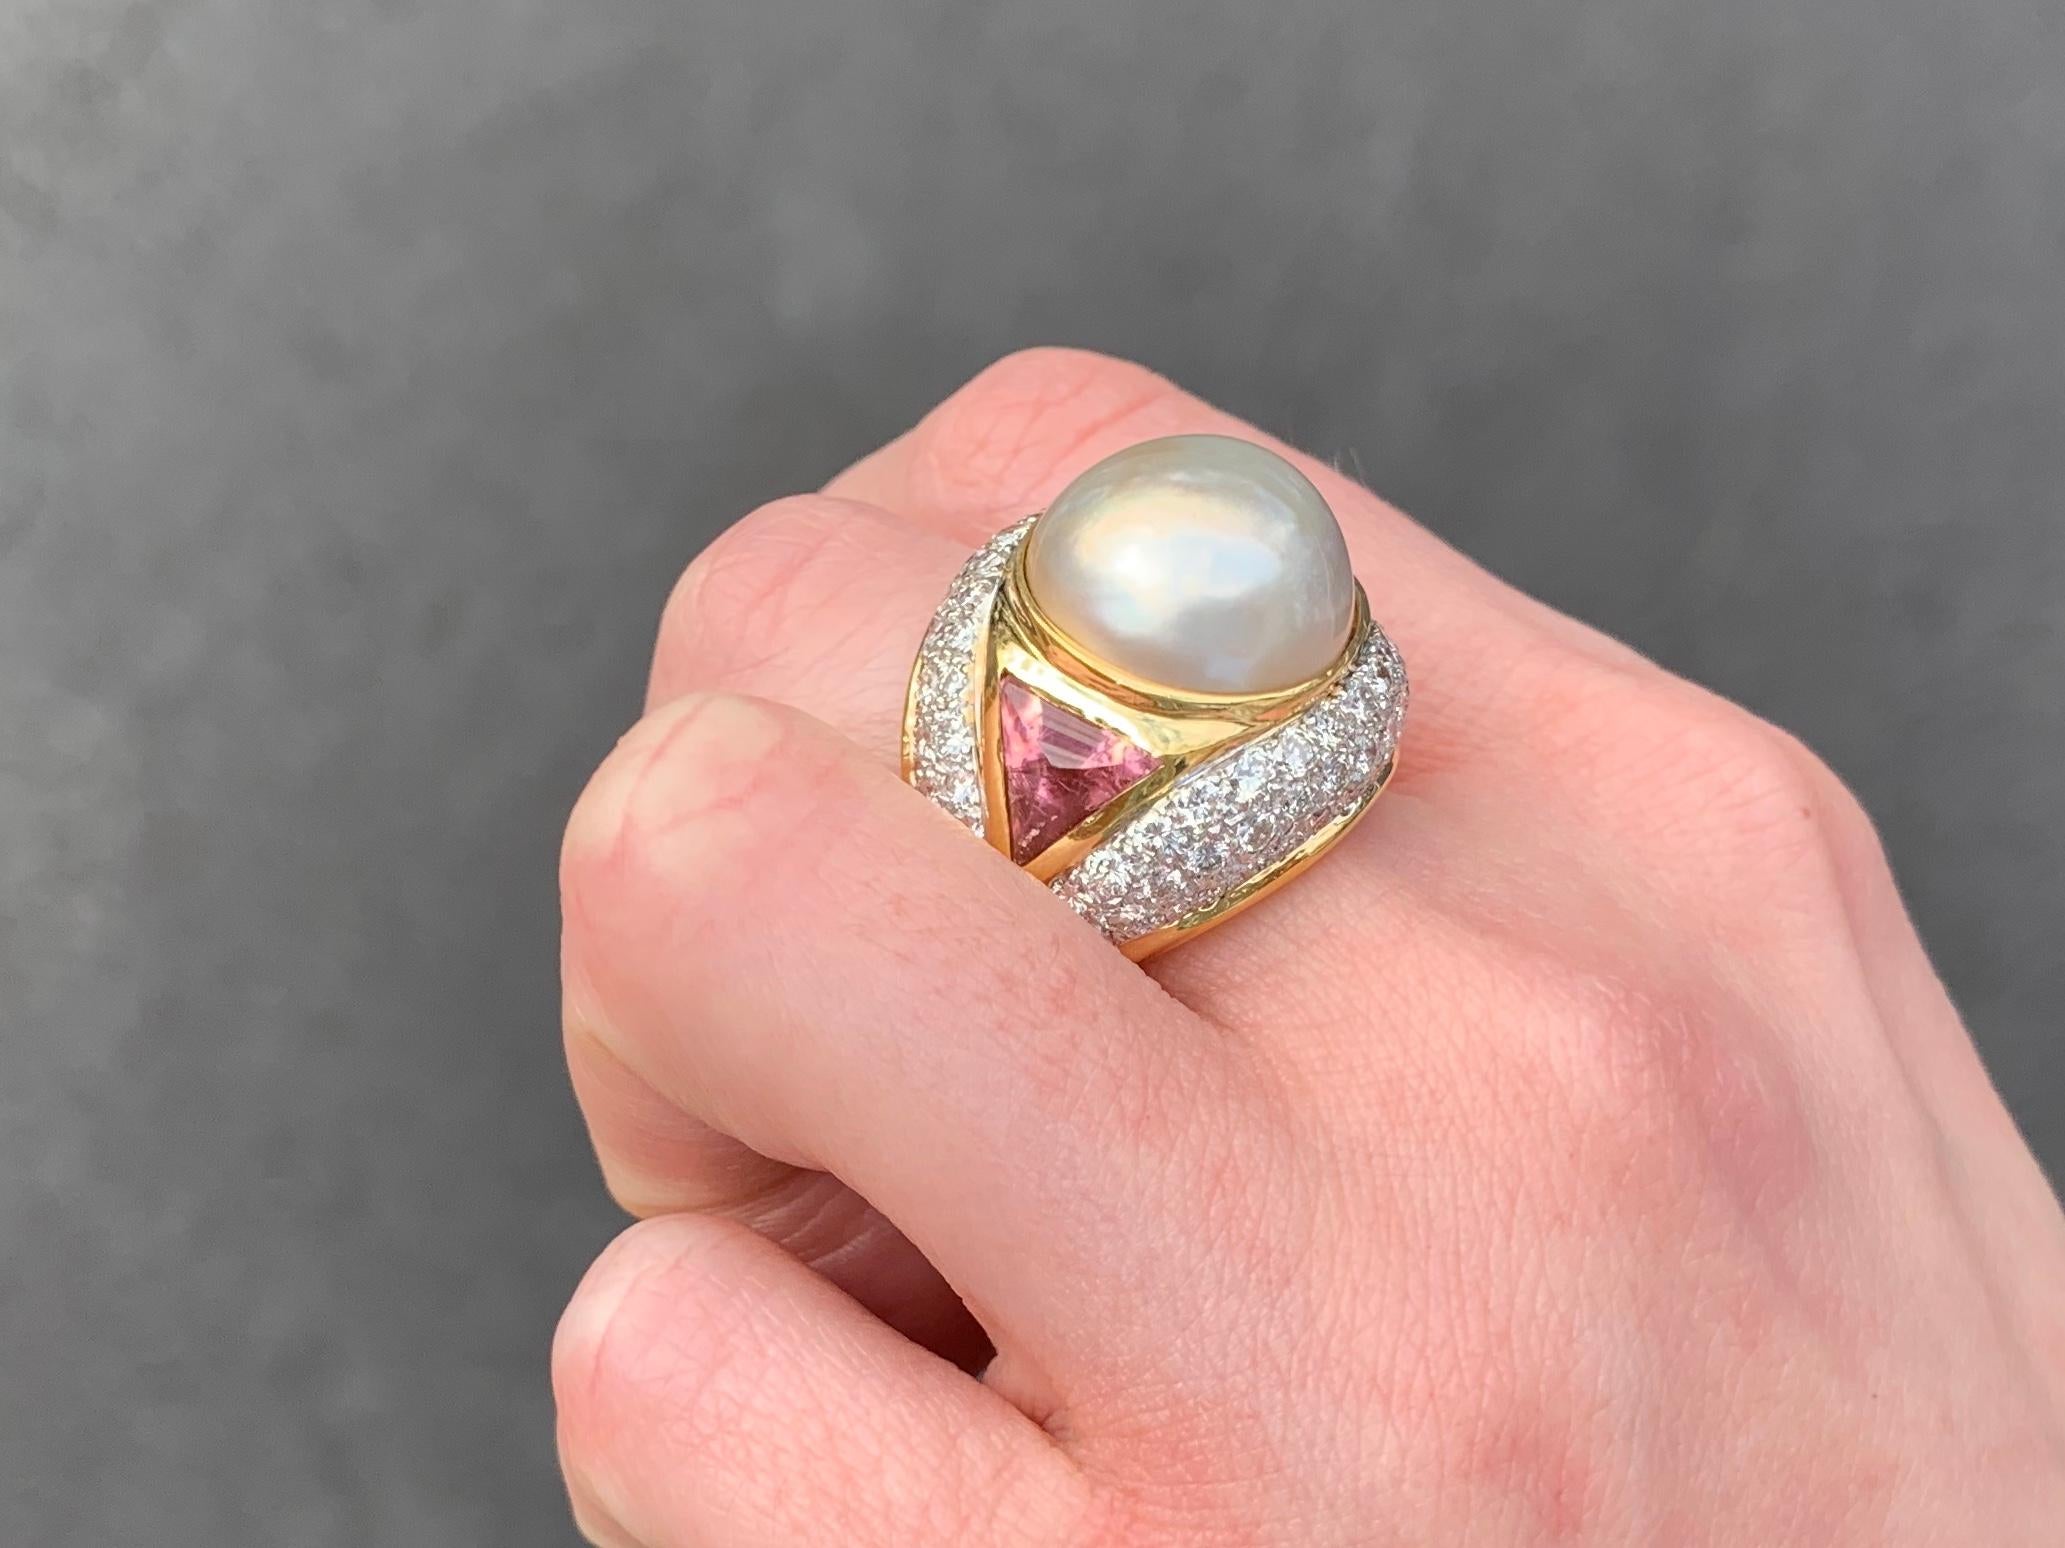 18 Karat Diamond, Pearl and Gemstone Cocktail Ring For Sale 4